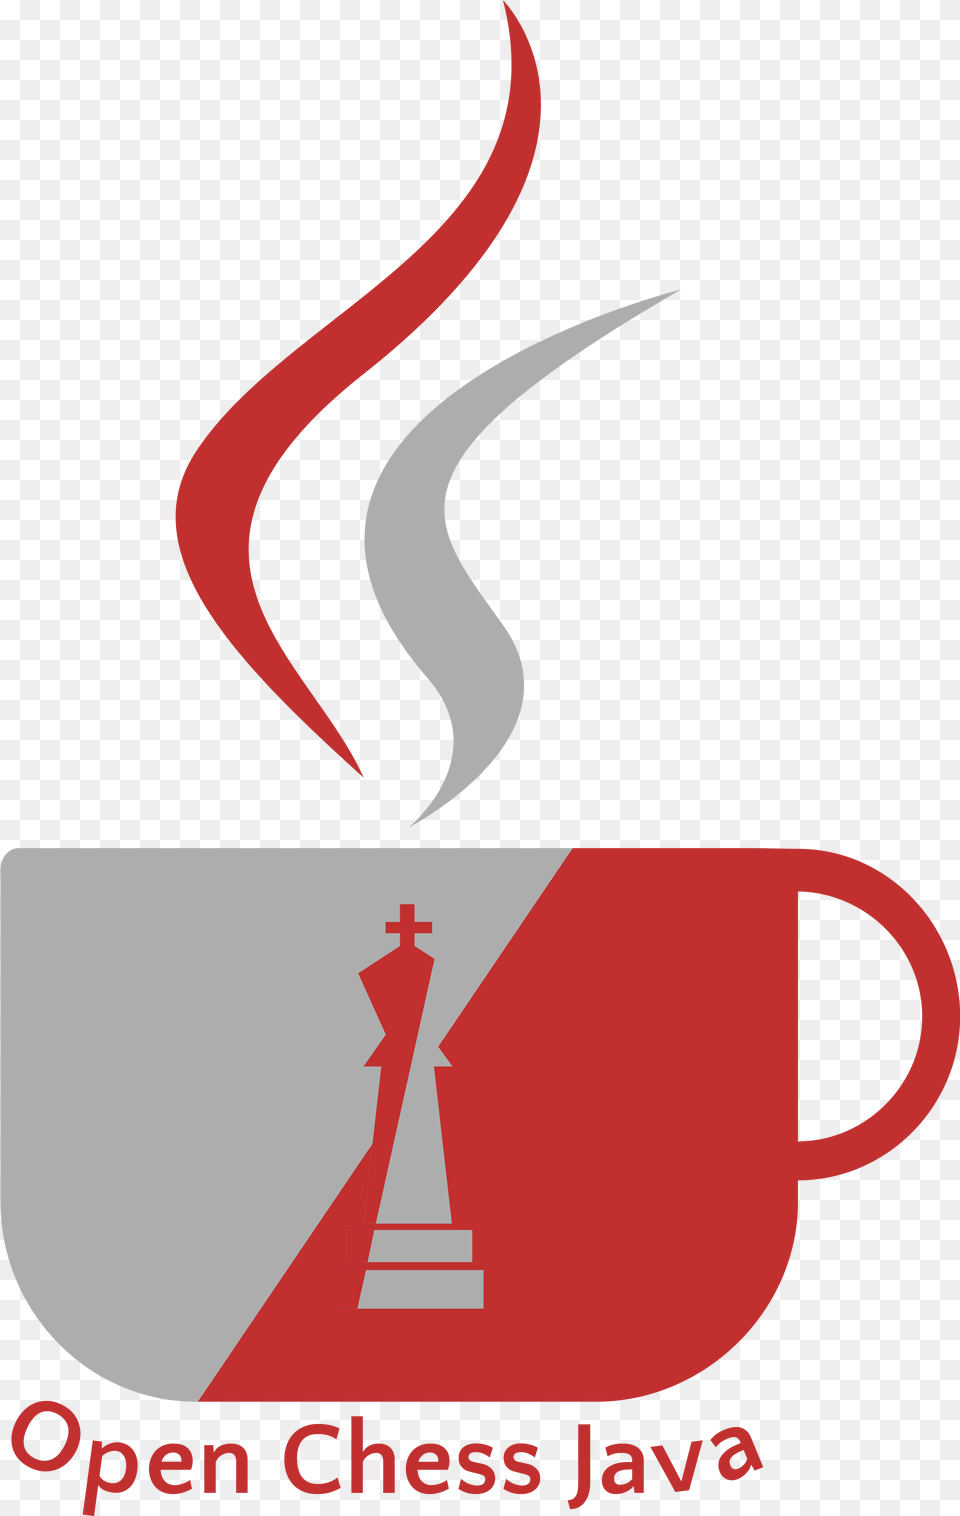 Openchessjavacomplete Graphic Design, Beverage, Coffee, Coffee Cup, Cup Png